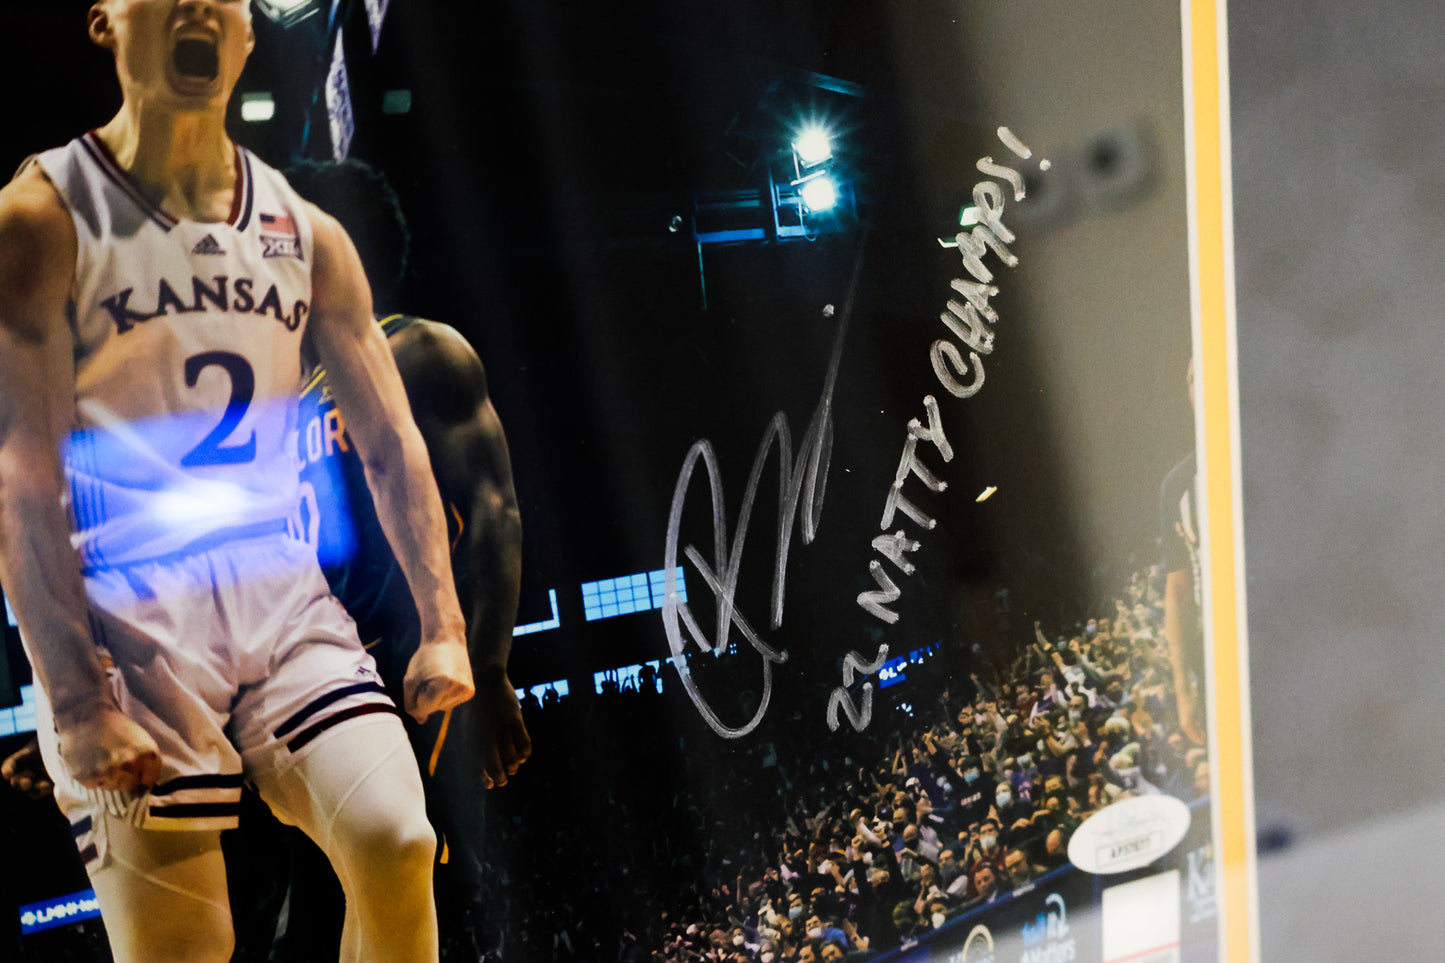 Christian Braun Autographed Nuggets and Jayhawks photos with deluxe framing JSA COA